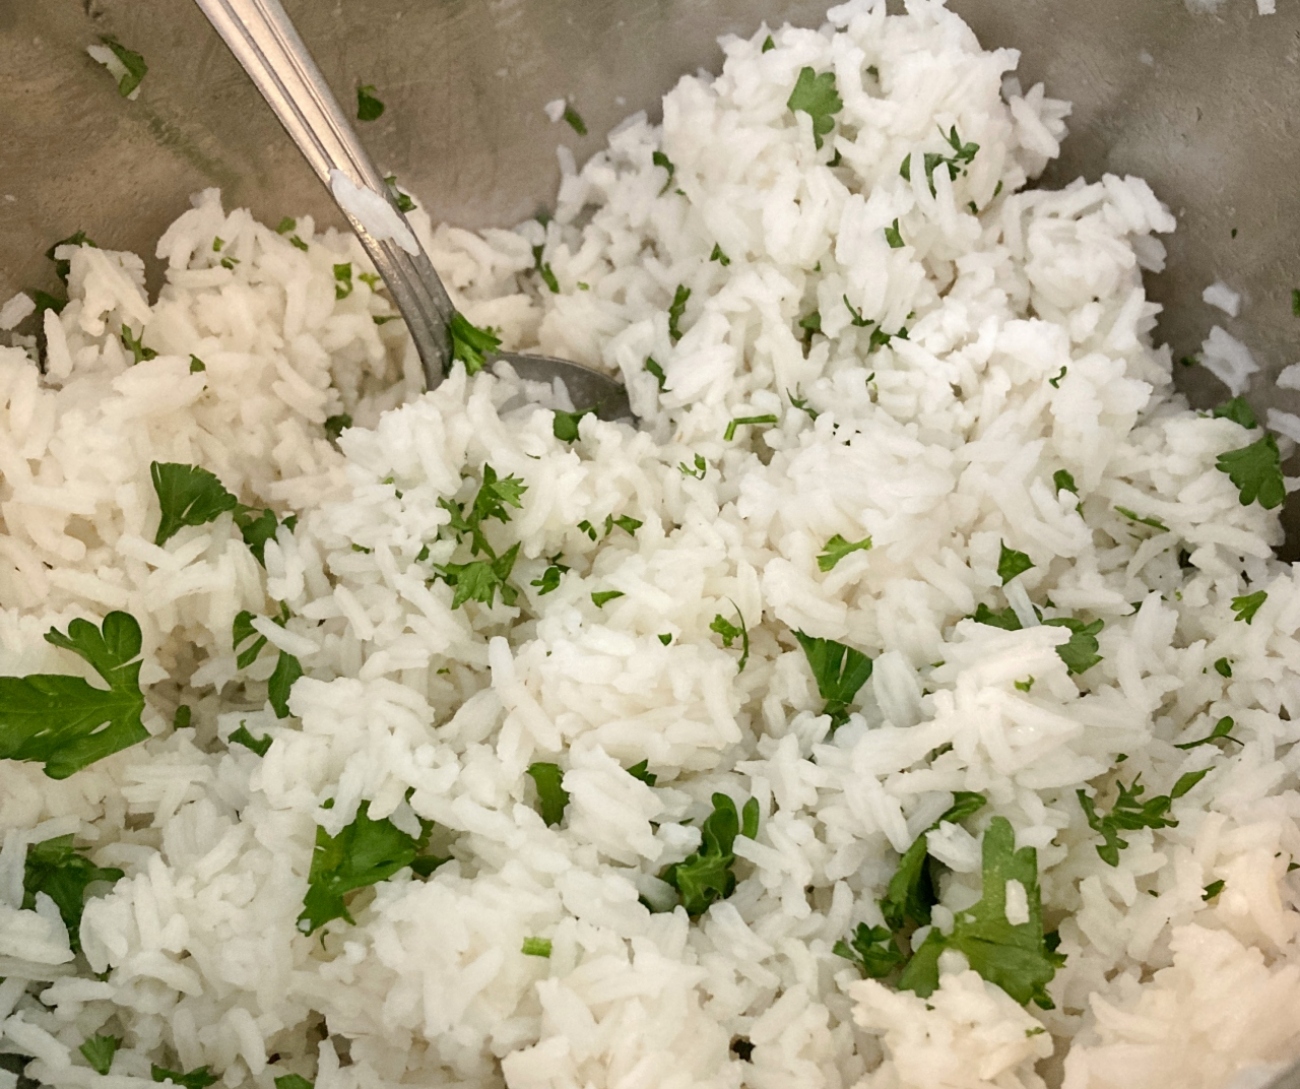 Add parsley to rice and stir. Serve shrimp over rice with kale.